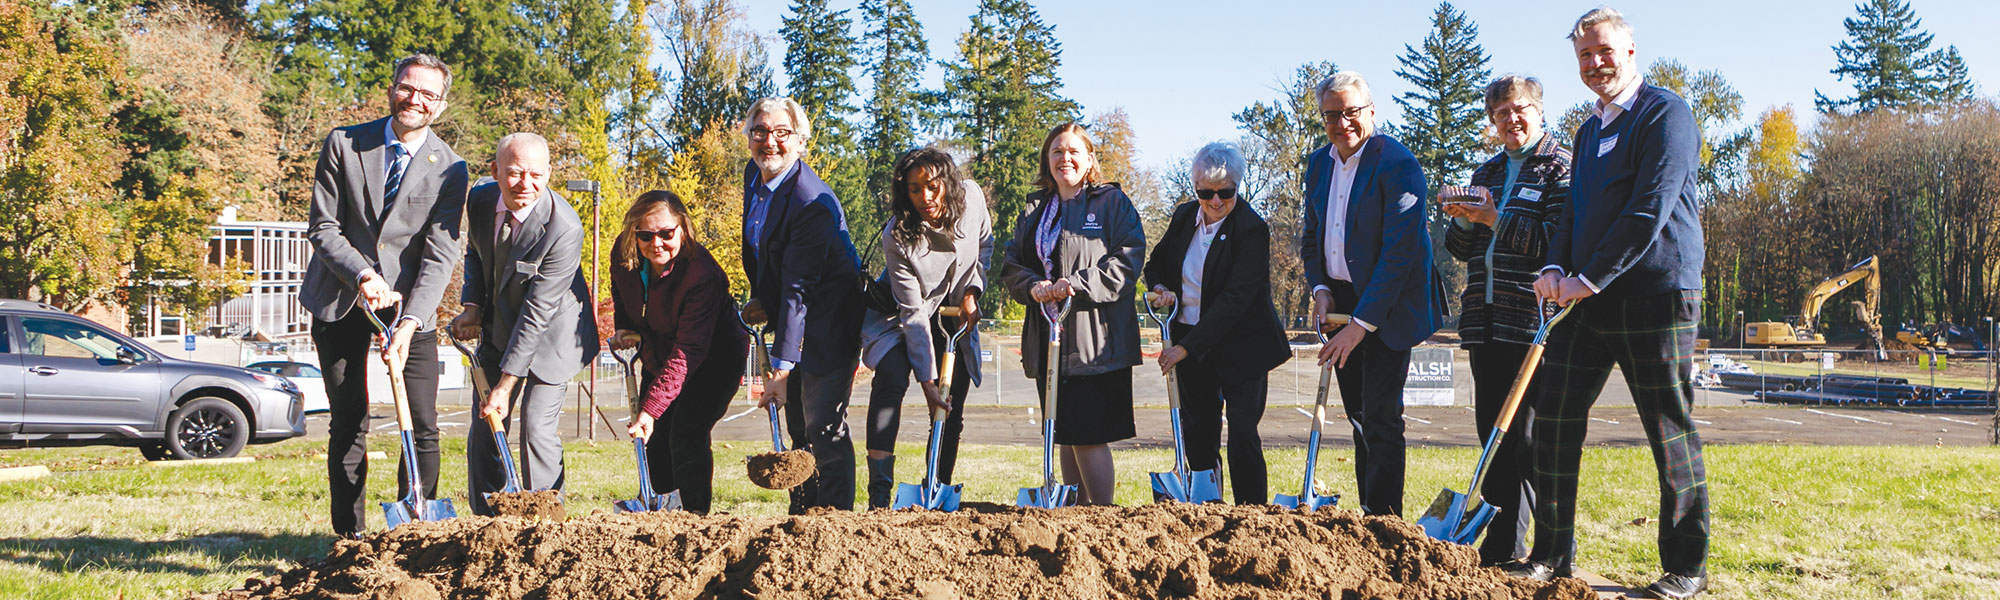 County Commissioner Paul Savas (second from left), along with other state and local officials, broke ground to begin the construction of Marylhurst Commons.